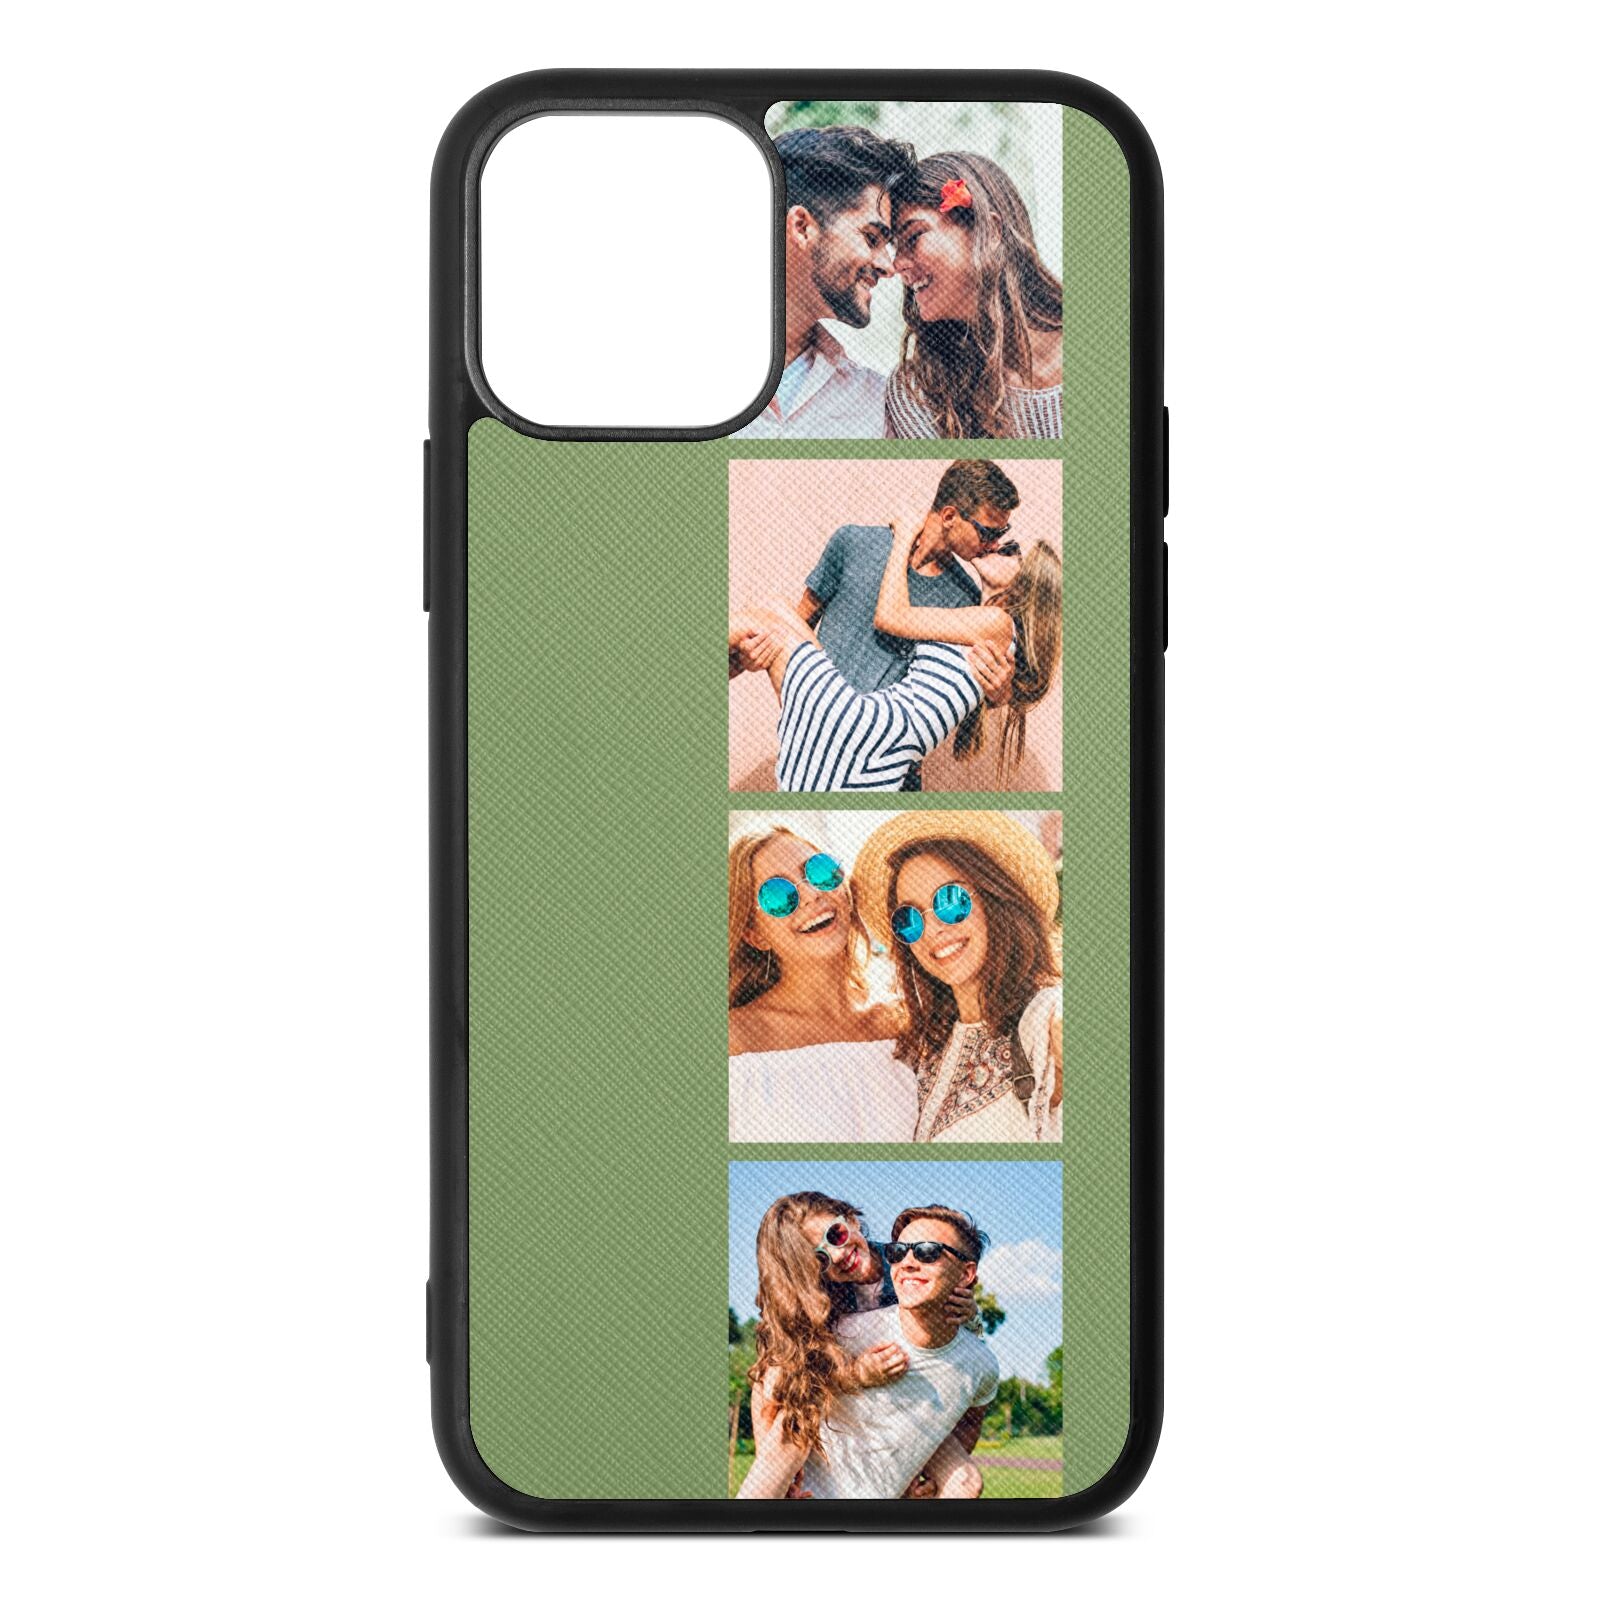 Photo Strip Montage Upload Lime Saffiano Leather iPhone 11 Case